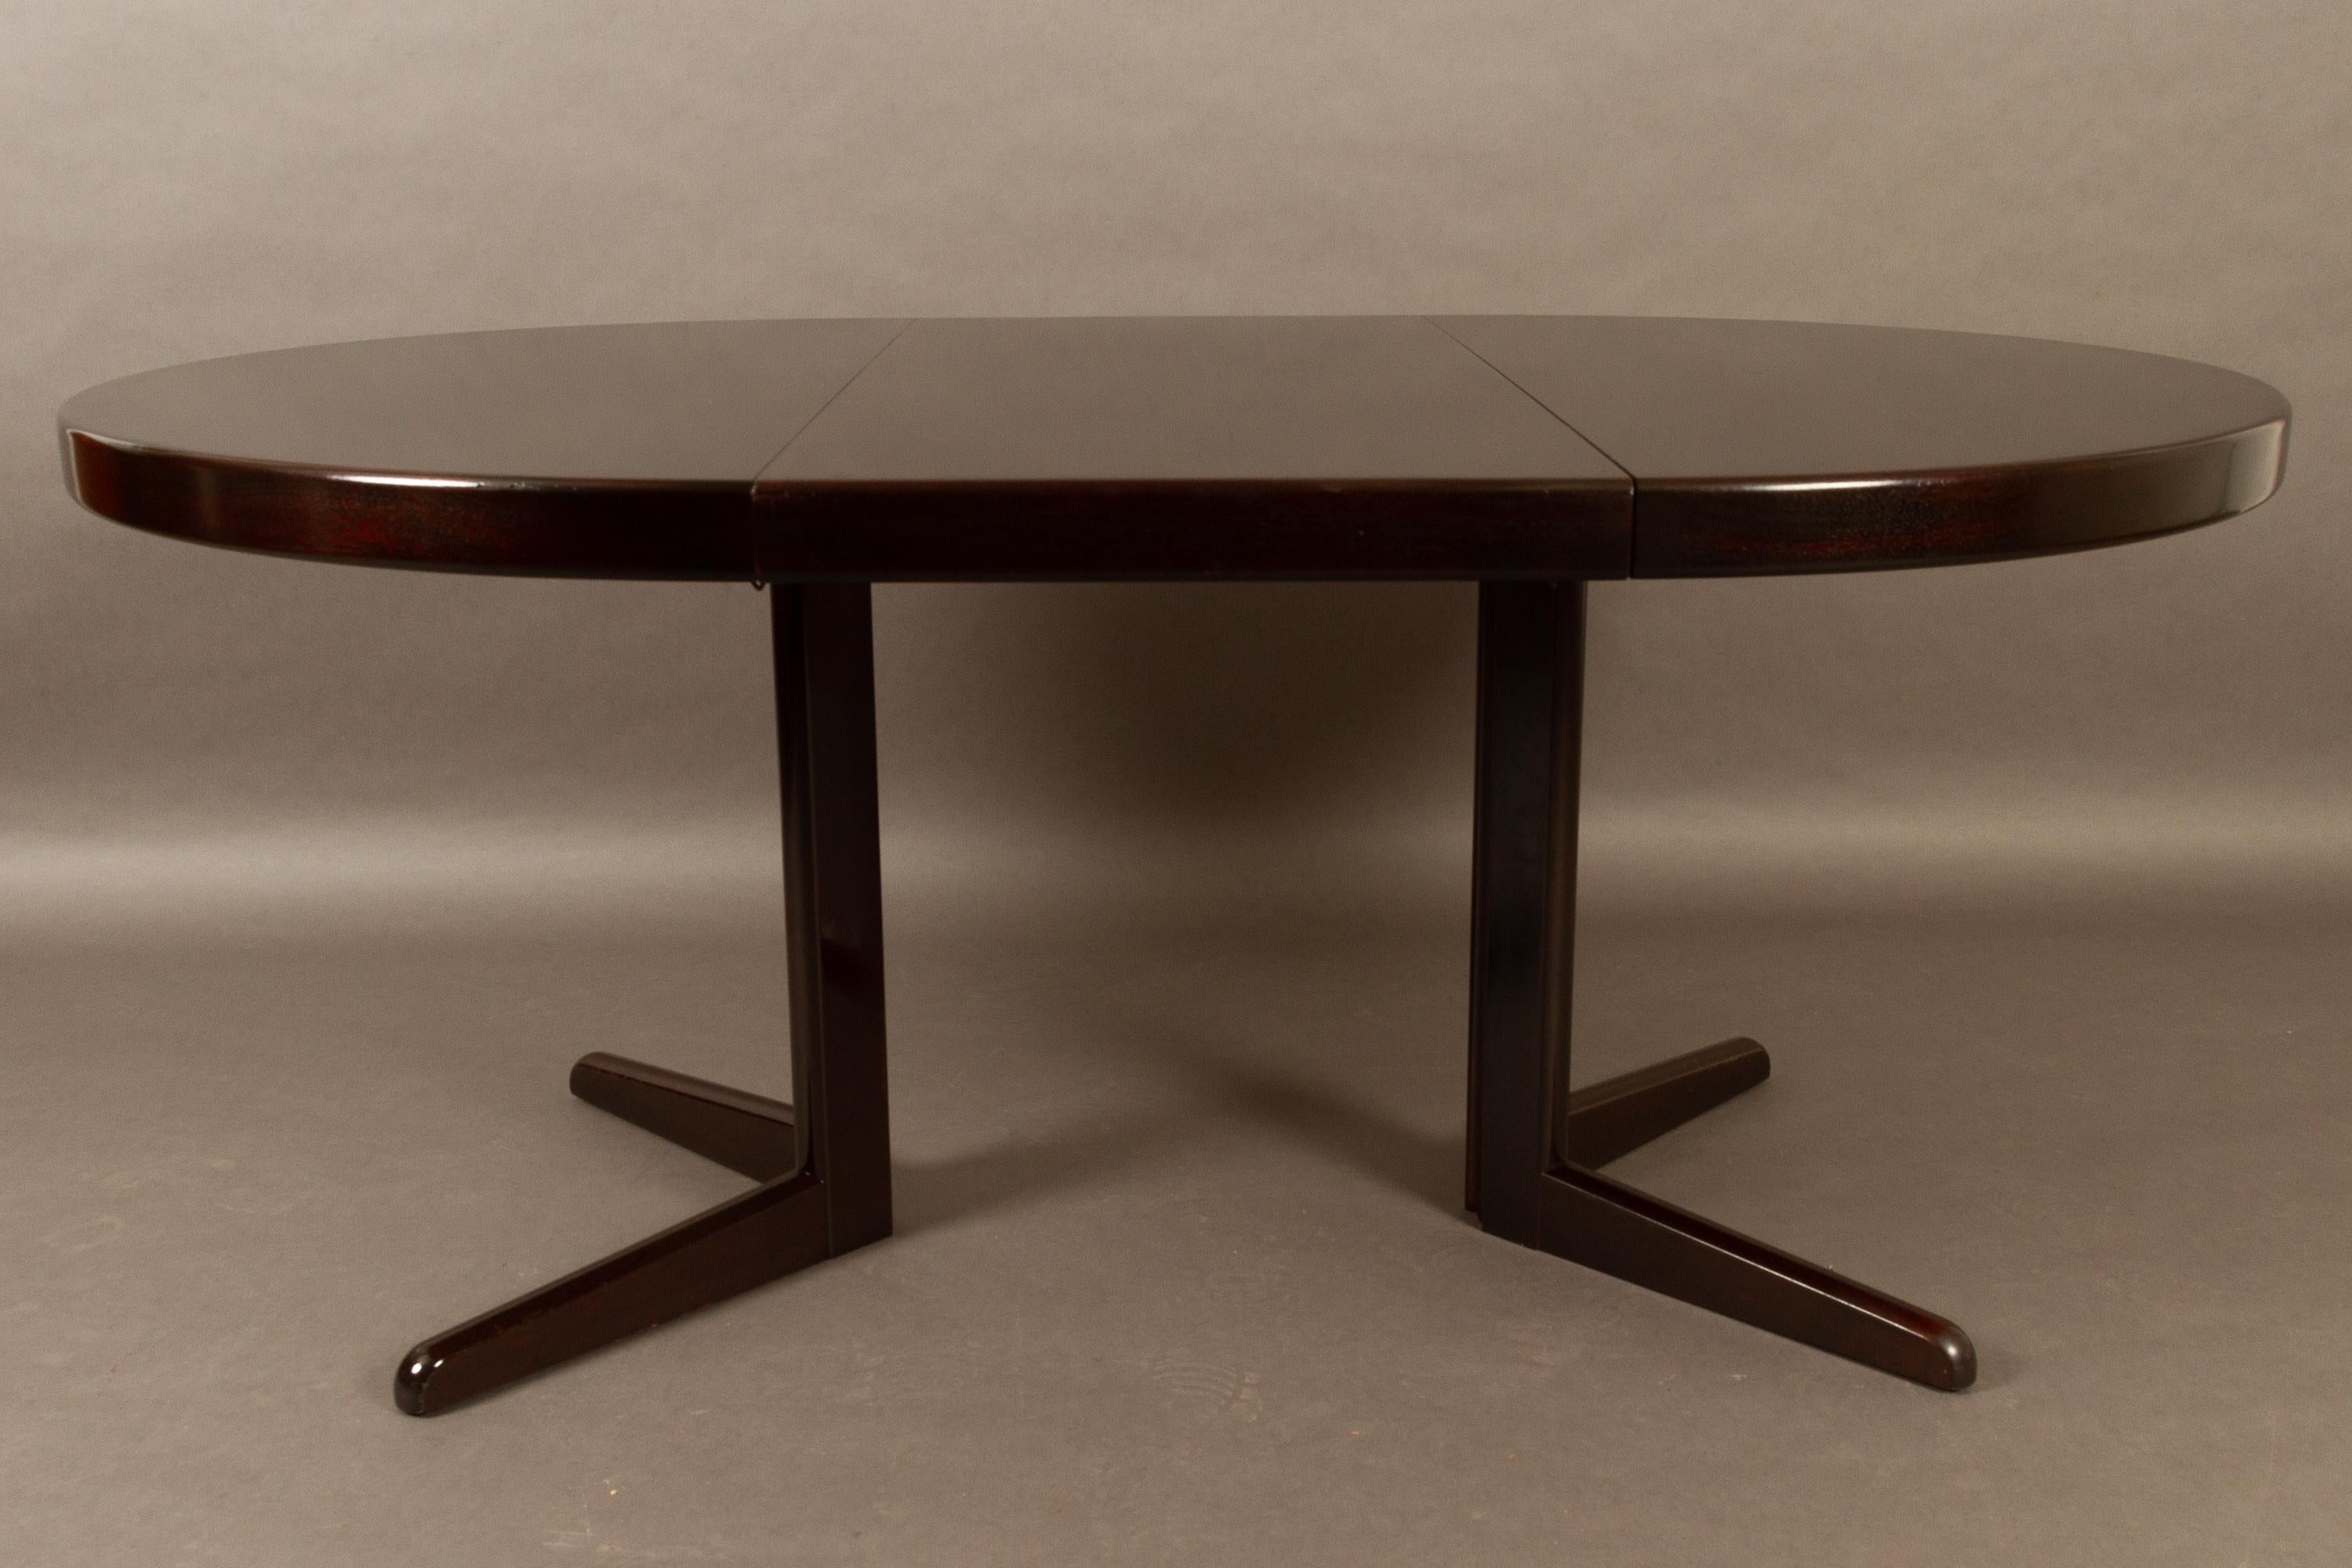 Scandinavian Modern Danish Mahogany Round Extendable Dining Table by H. W. Klein for Bramin, 1970s